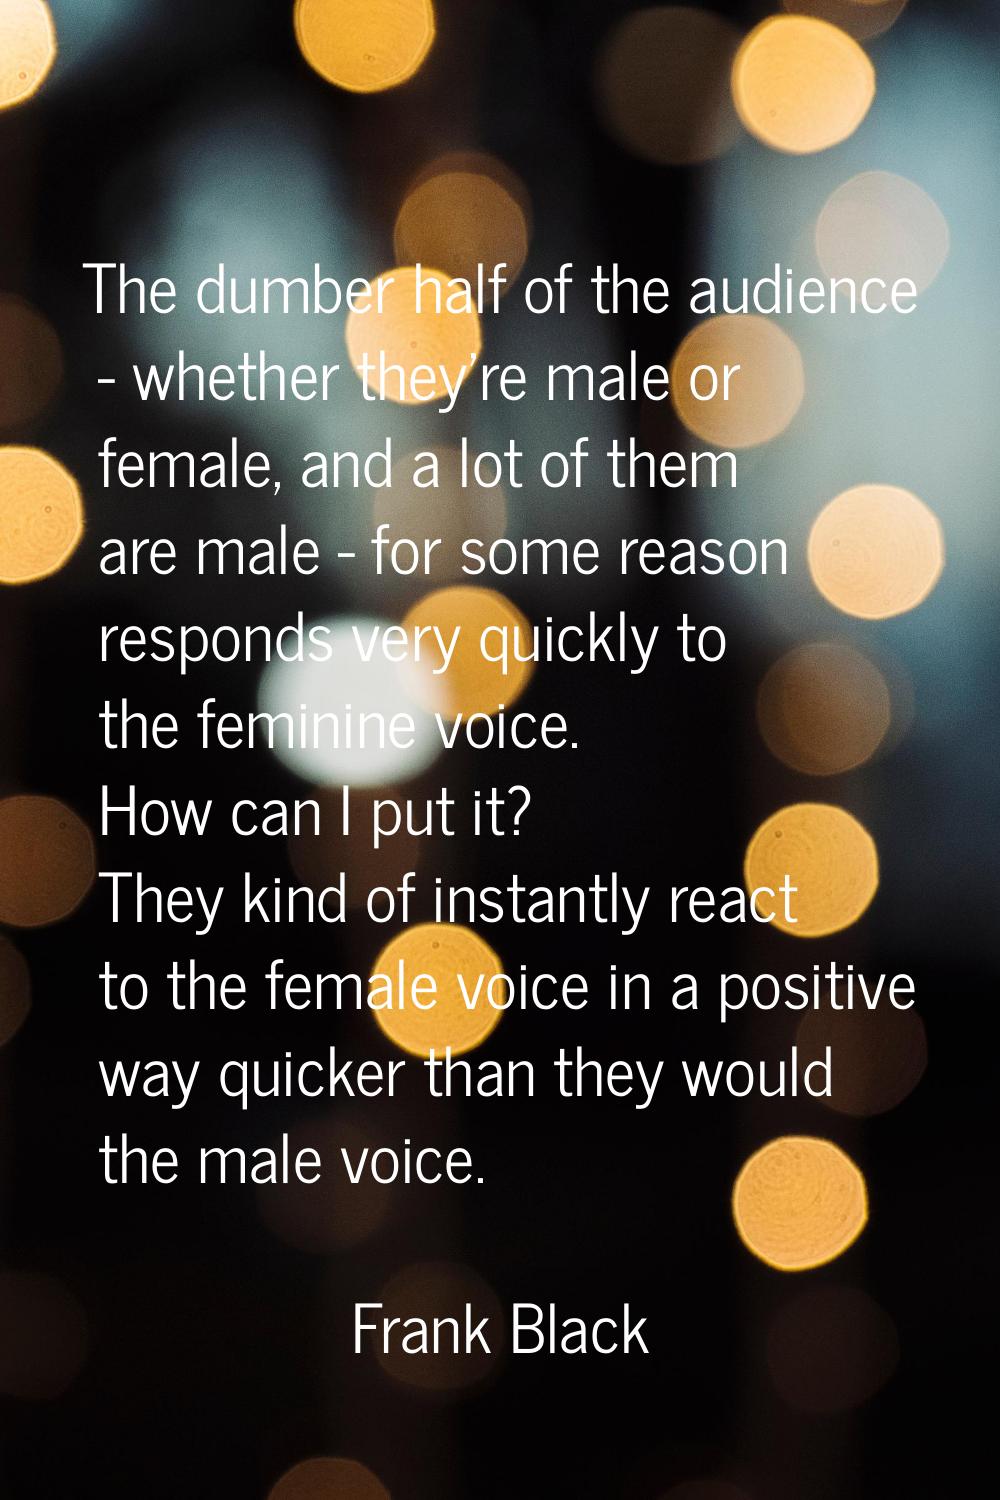 The dumber half of the audience - whether they're male or female, and a lot of them are male - for 